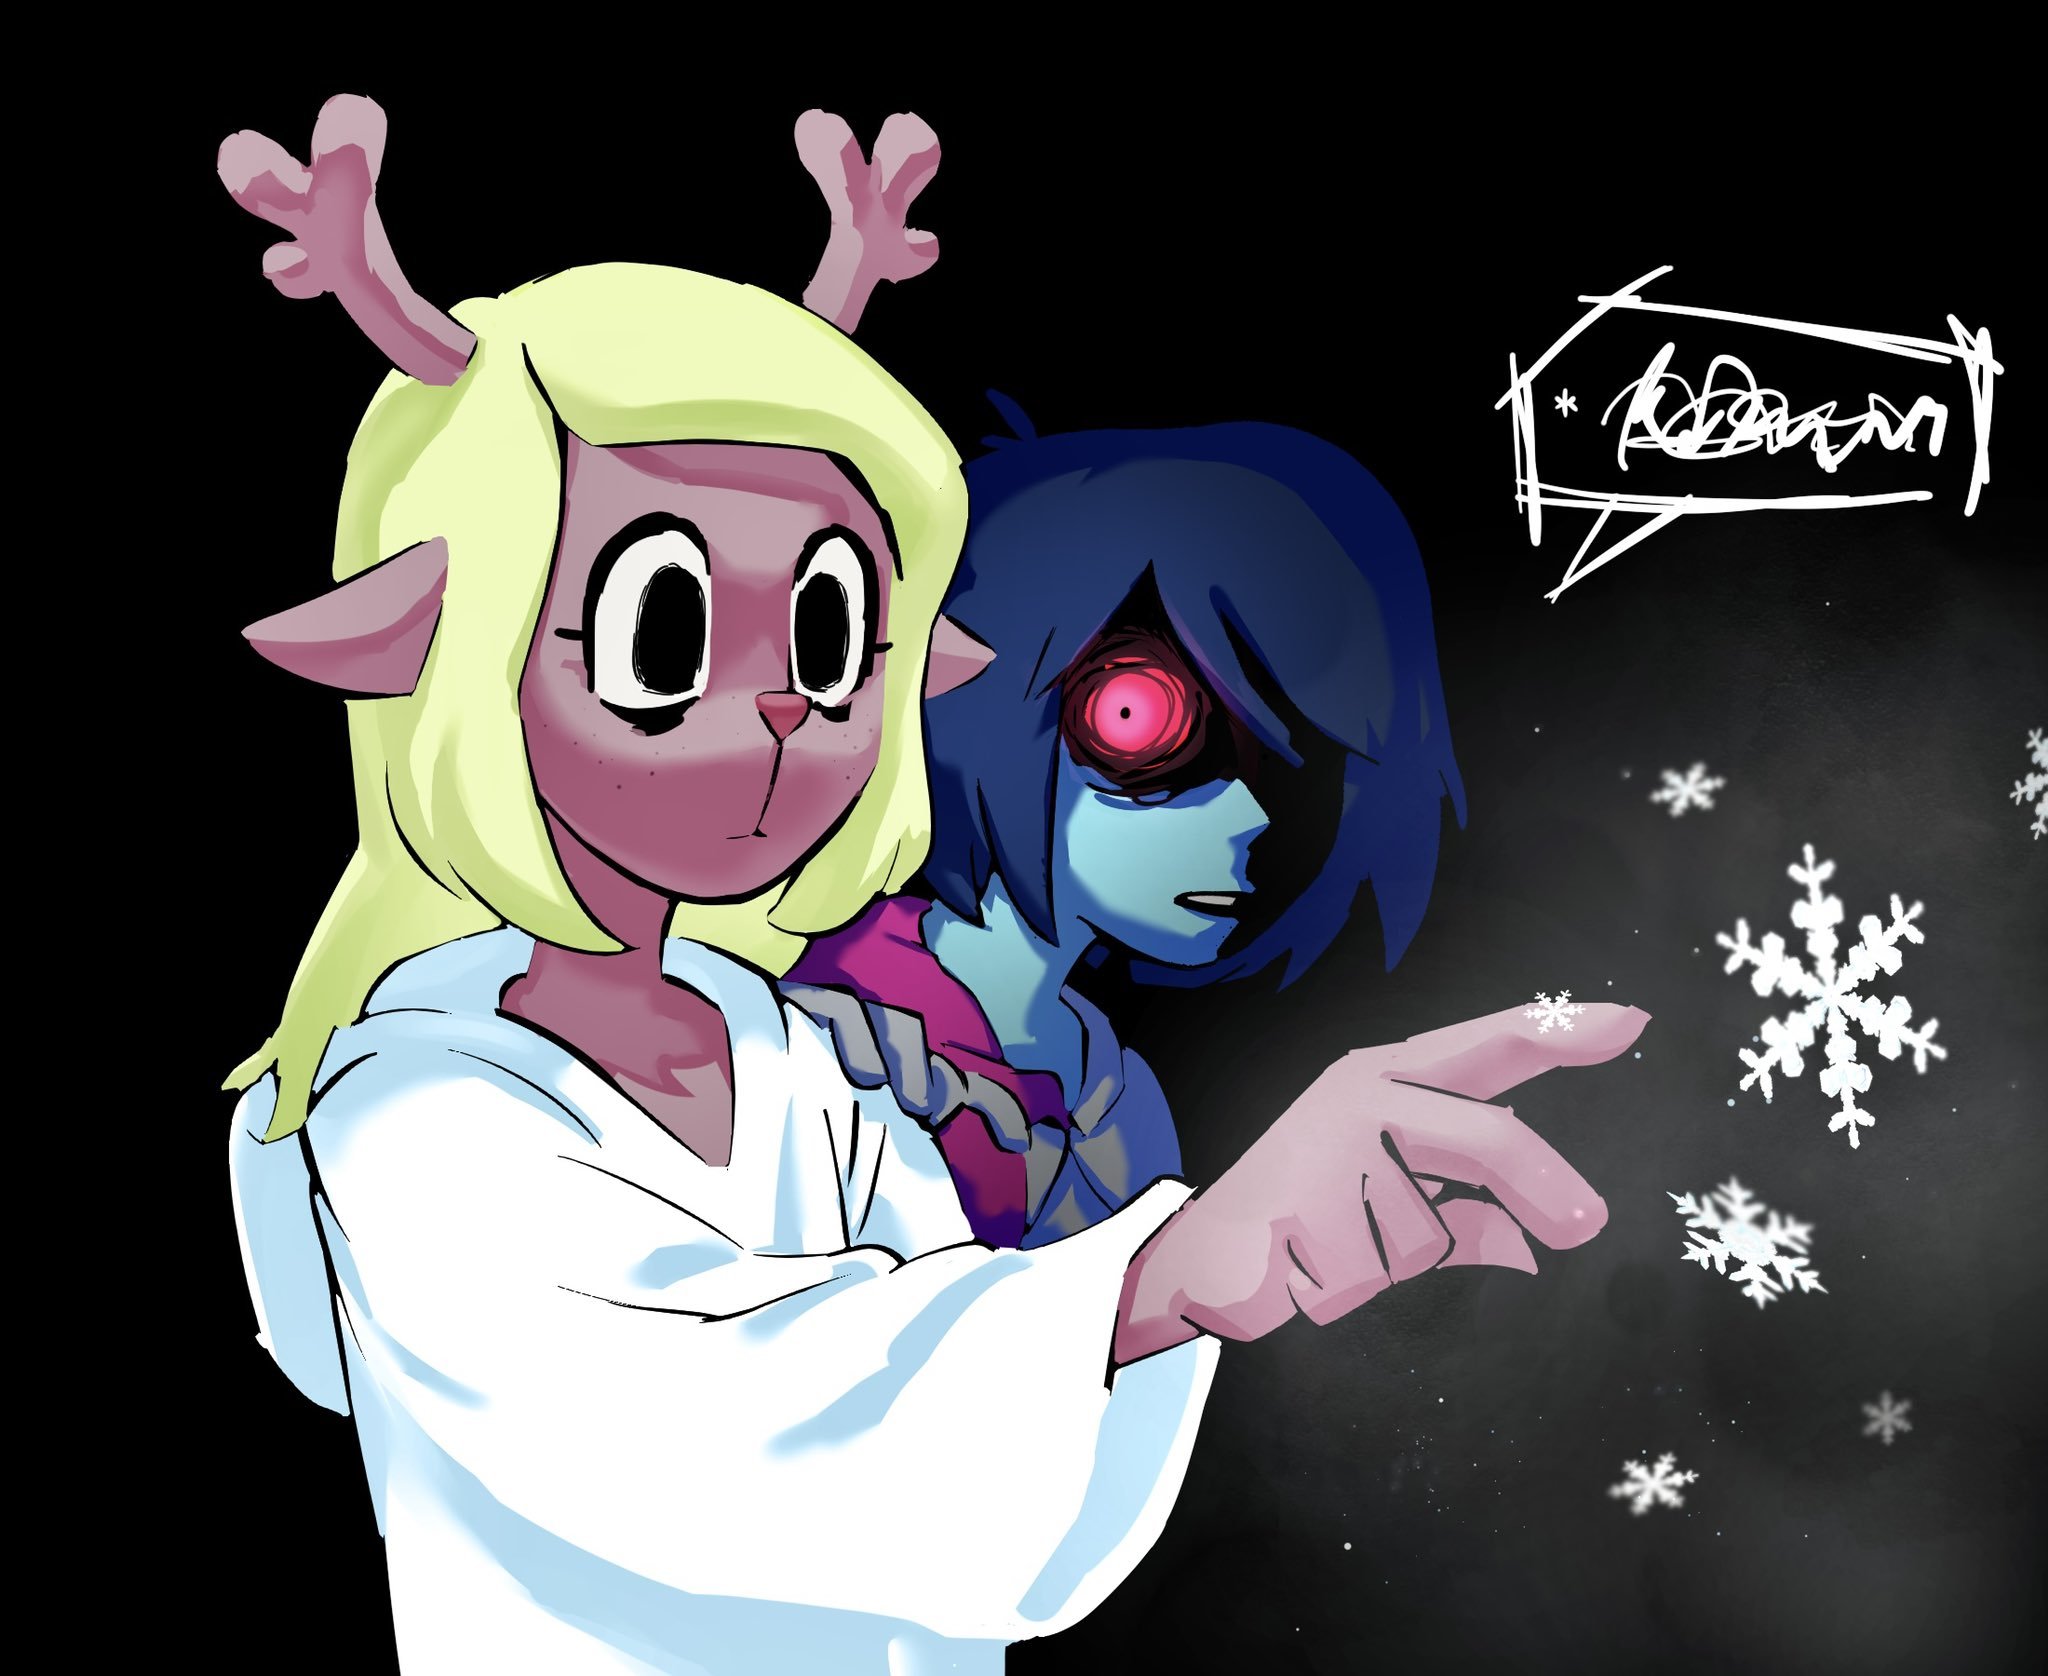 Your Choices Don't Matter by Toby Fox - Deltarune, Kris, Art, Games, Spoiler, Noelle Holiday